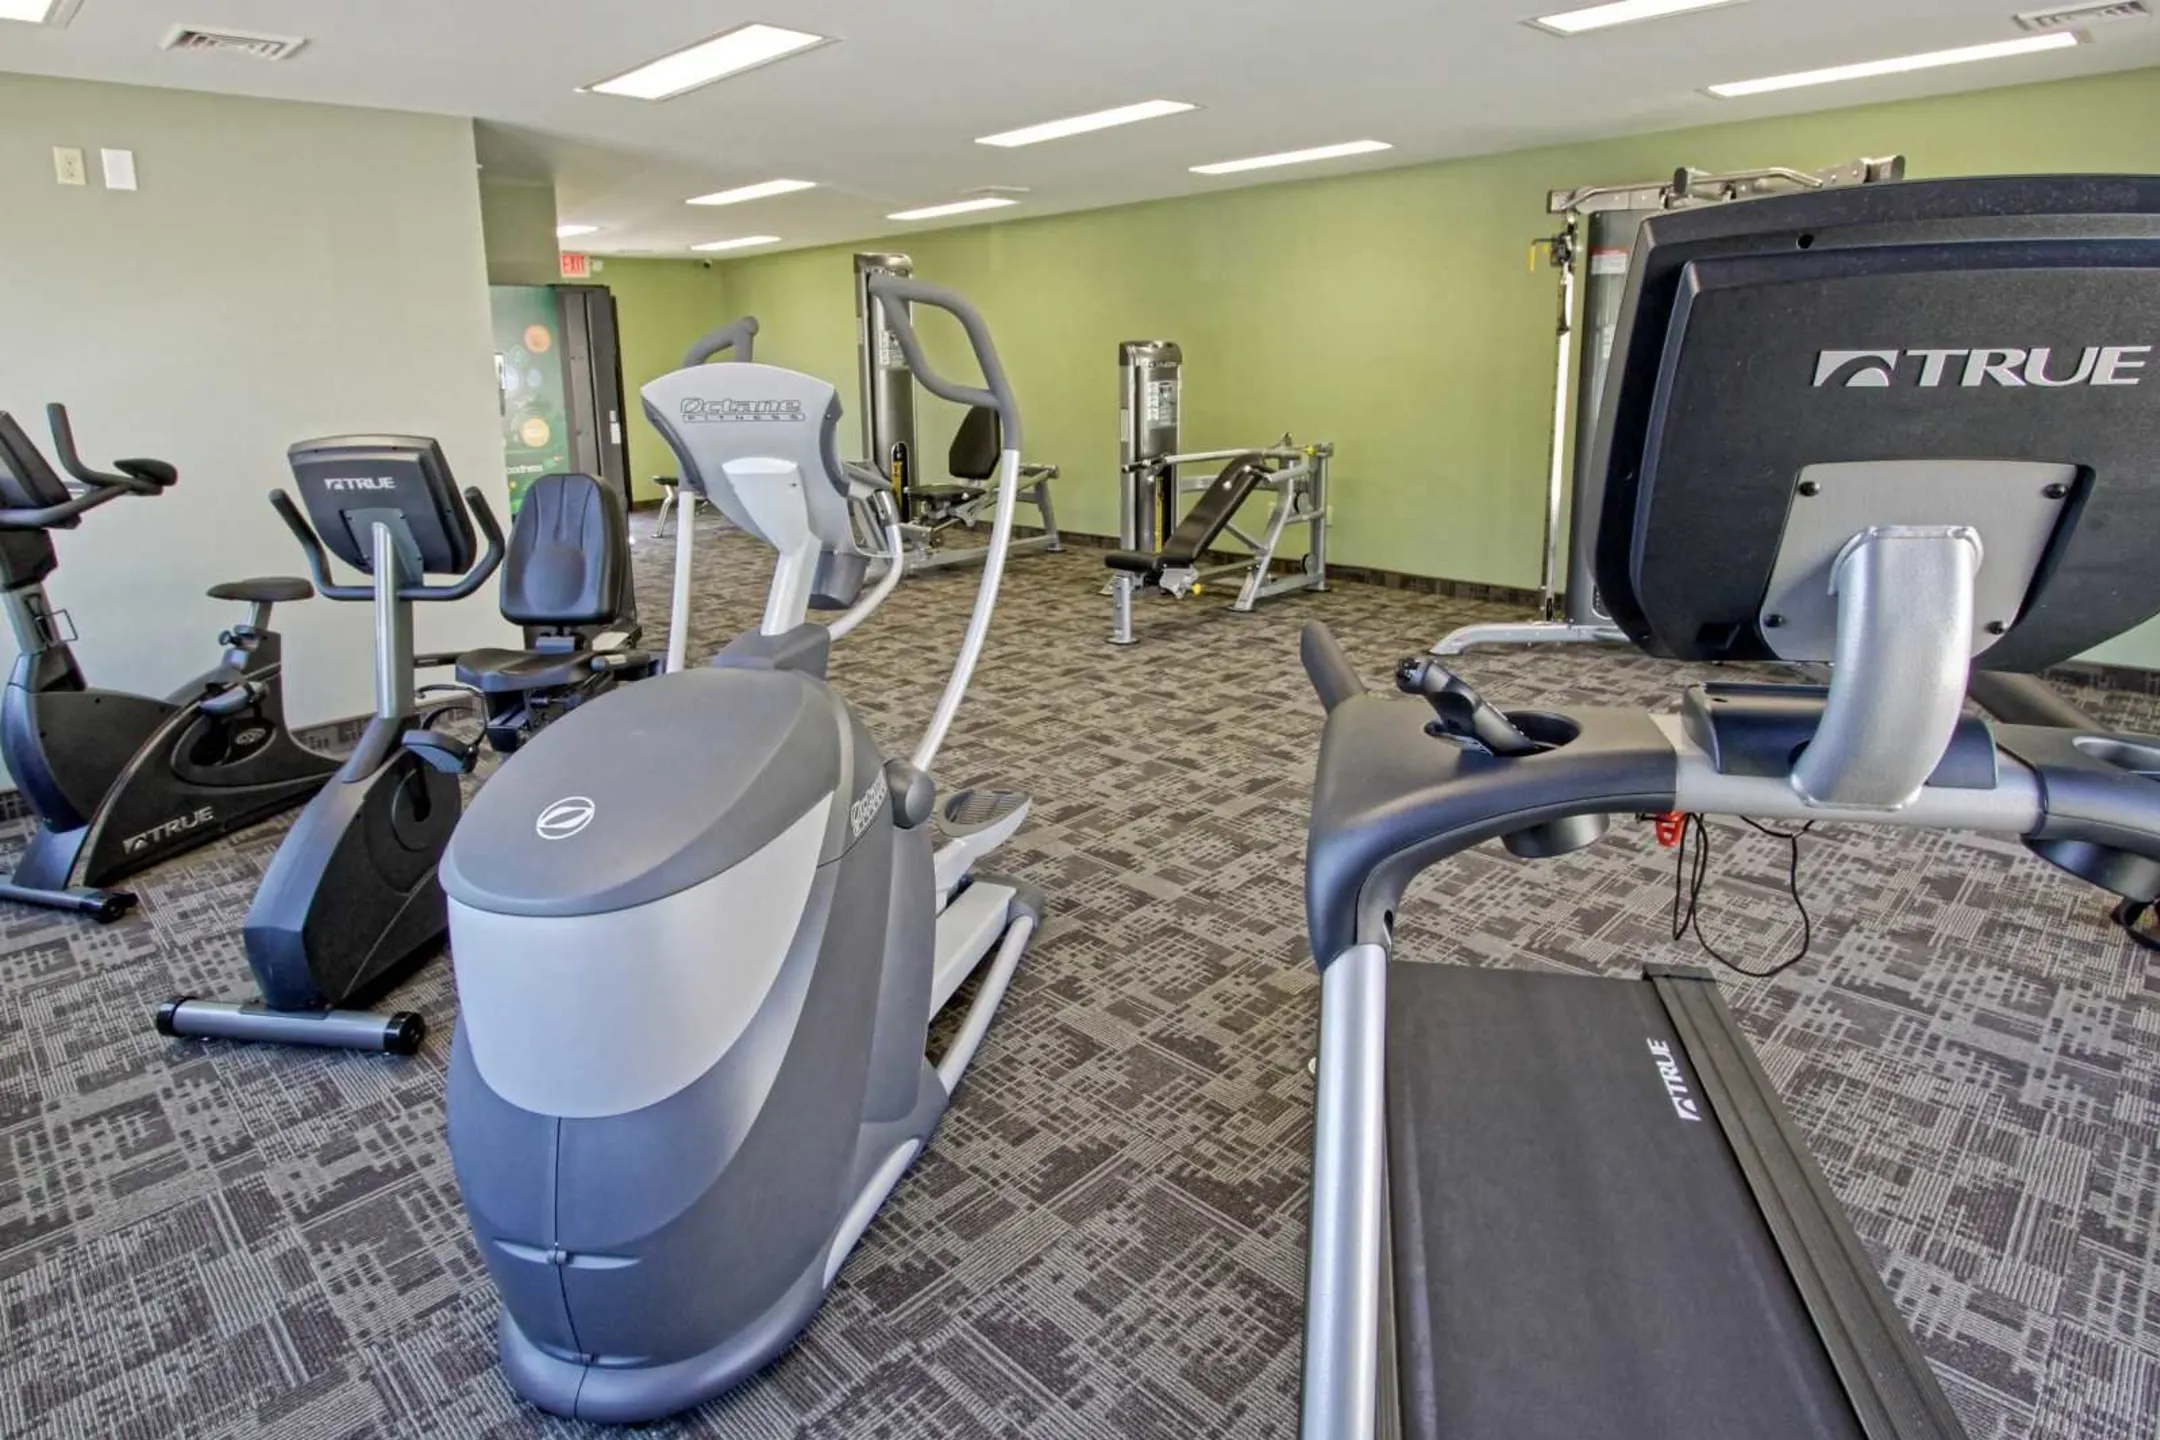 Fitness Weight Room - Pennswood Apartments & Townhomes - Harrisburg, PA